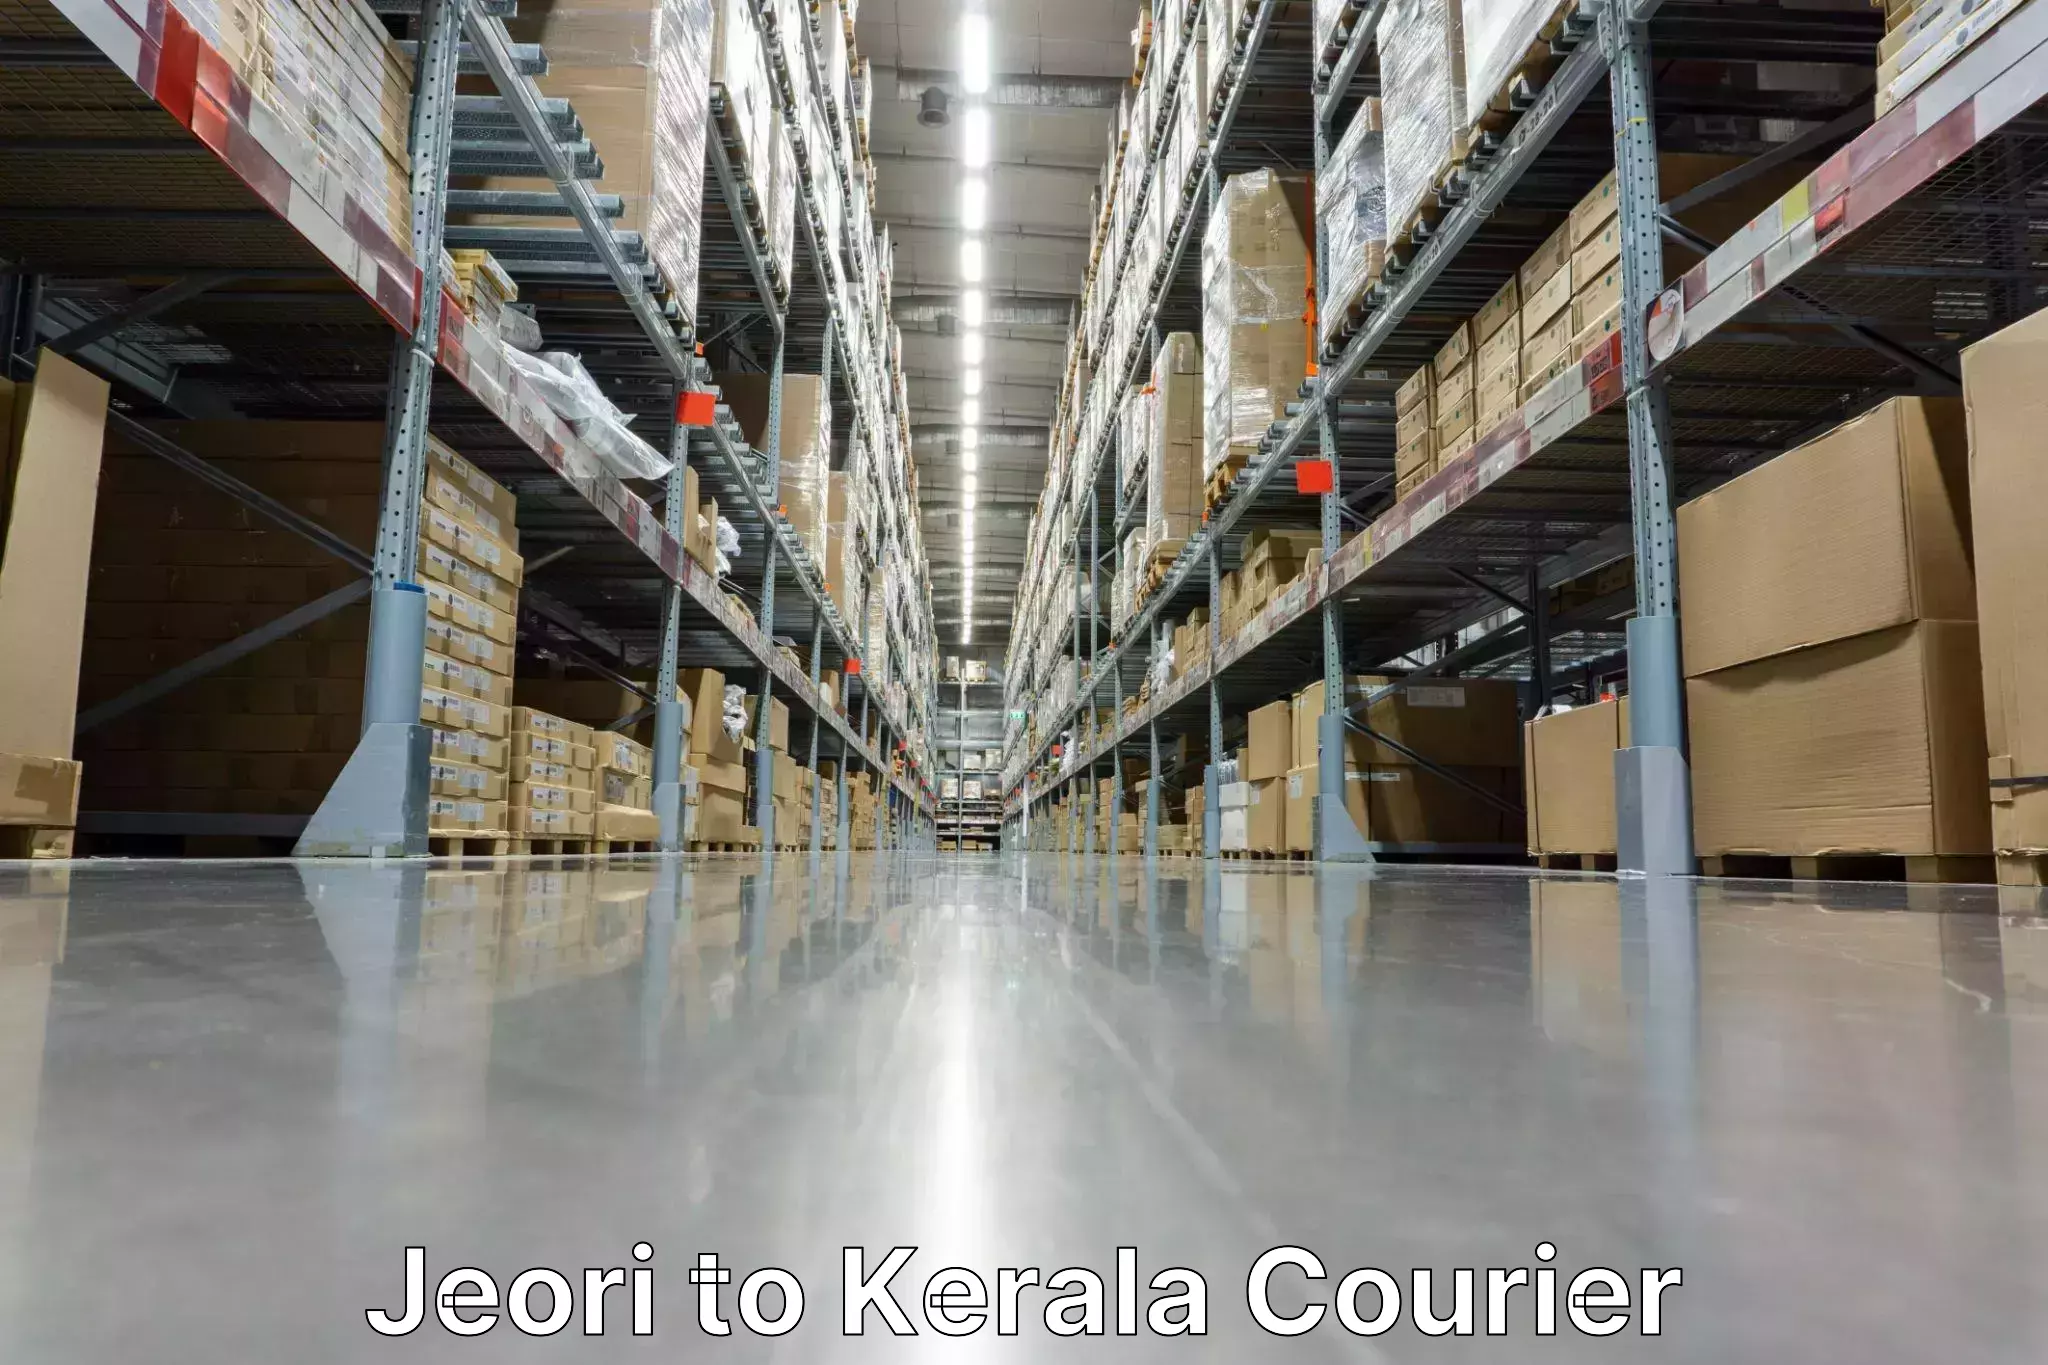 Cash on delivery service Jeori to Kerala